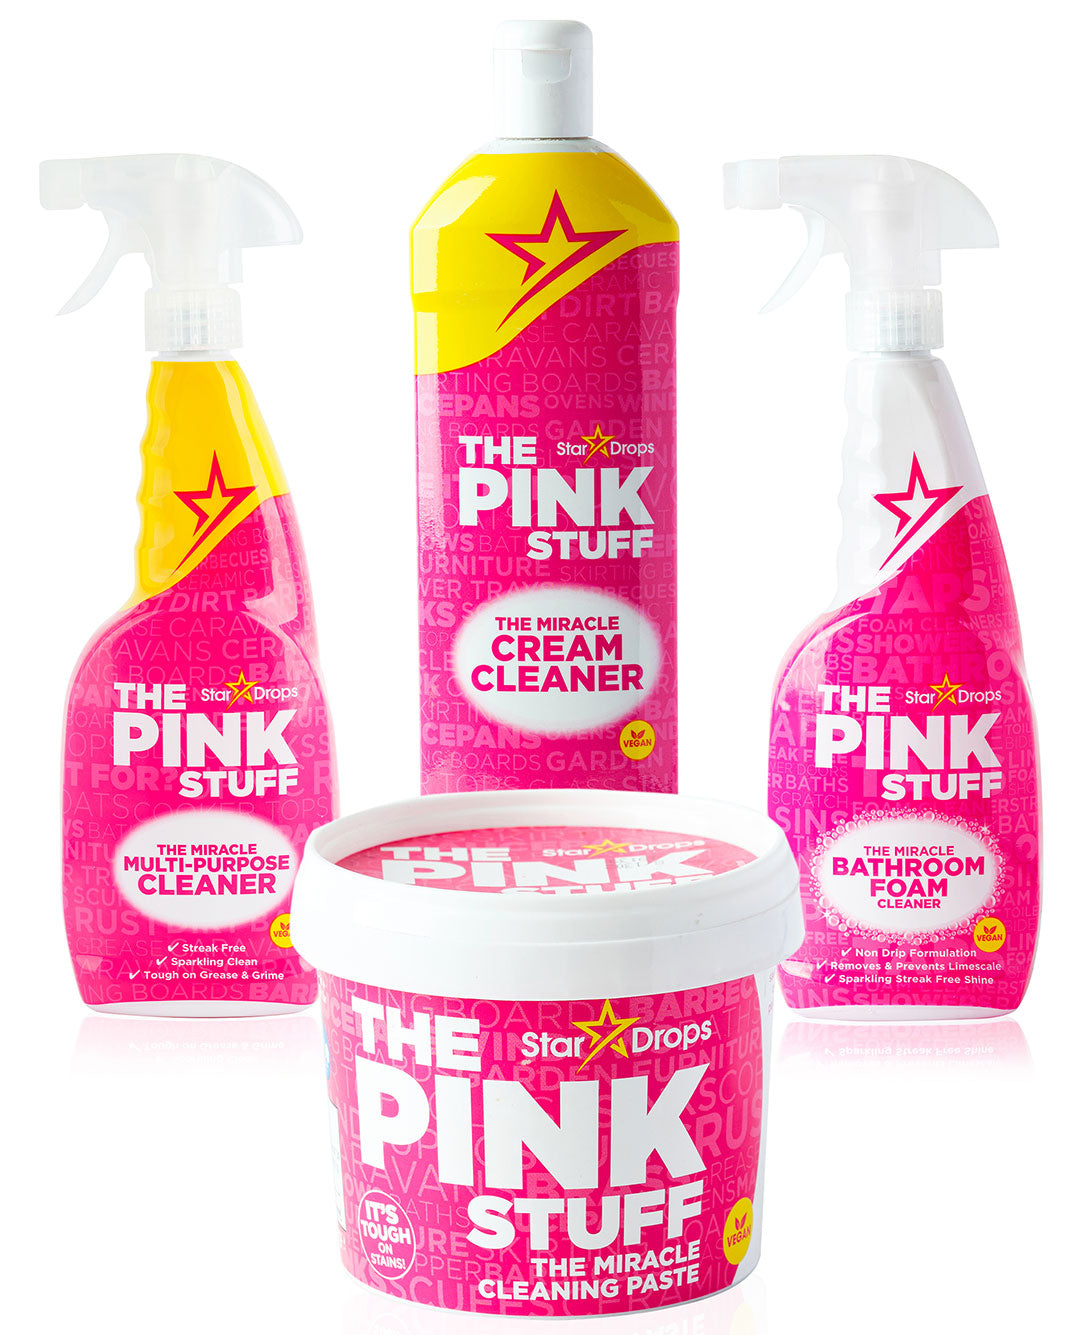 Introducing the Miracle Cleaner - The Pink Stuff! – Scrub Daddy